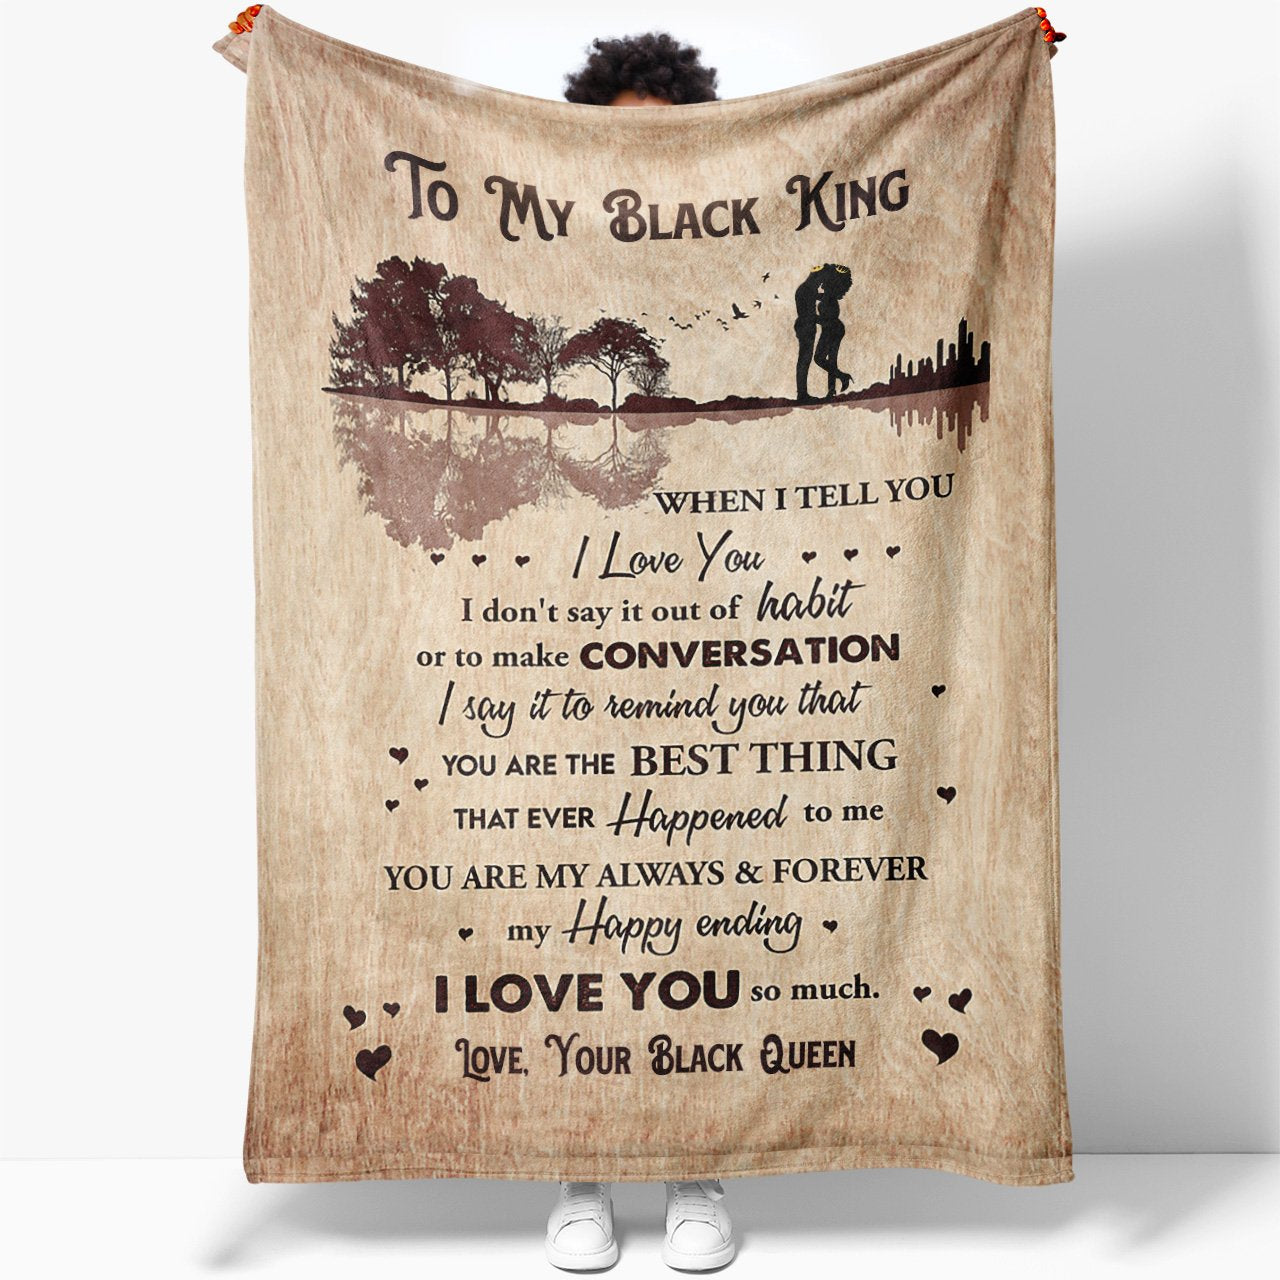 To My Black King Husband Blanket Gift, When I Tell You I Love You Blanket Gift for Him, Christmas Ideas For Husband, Anniversary Gift for Him